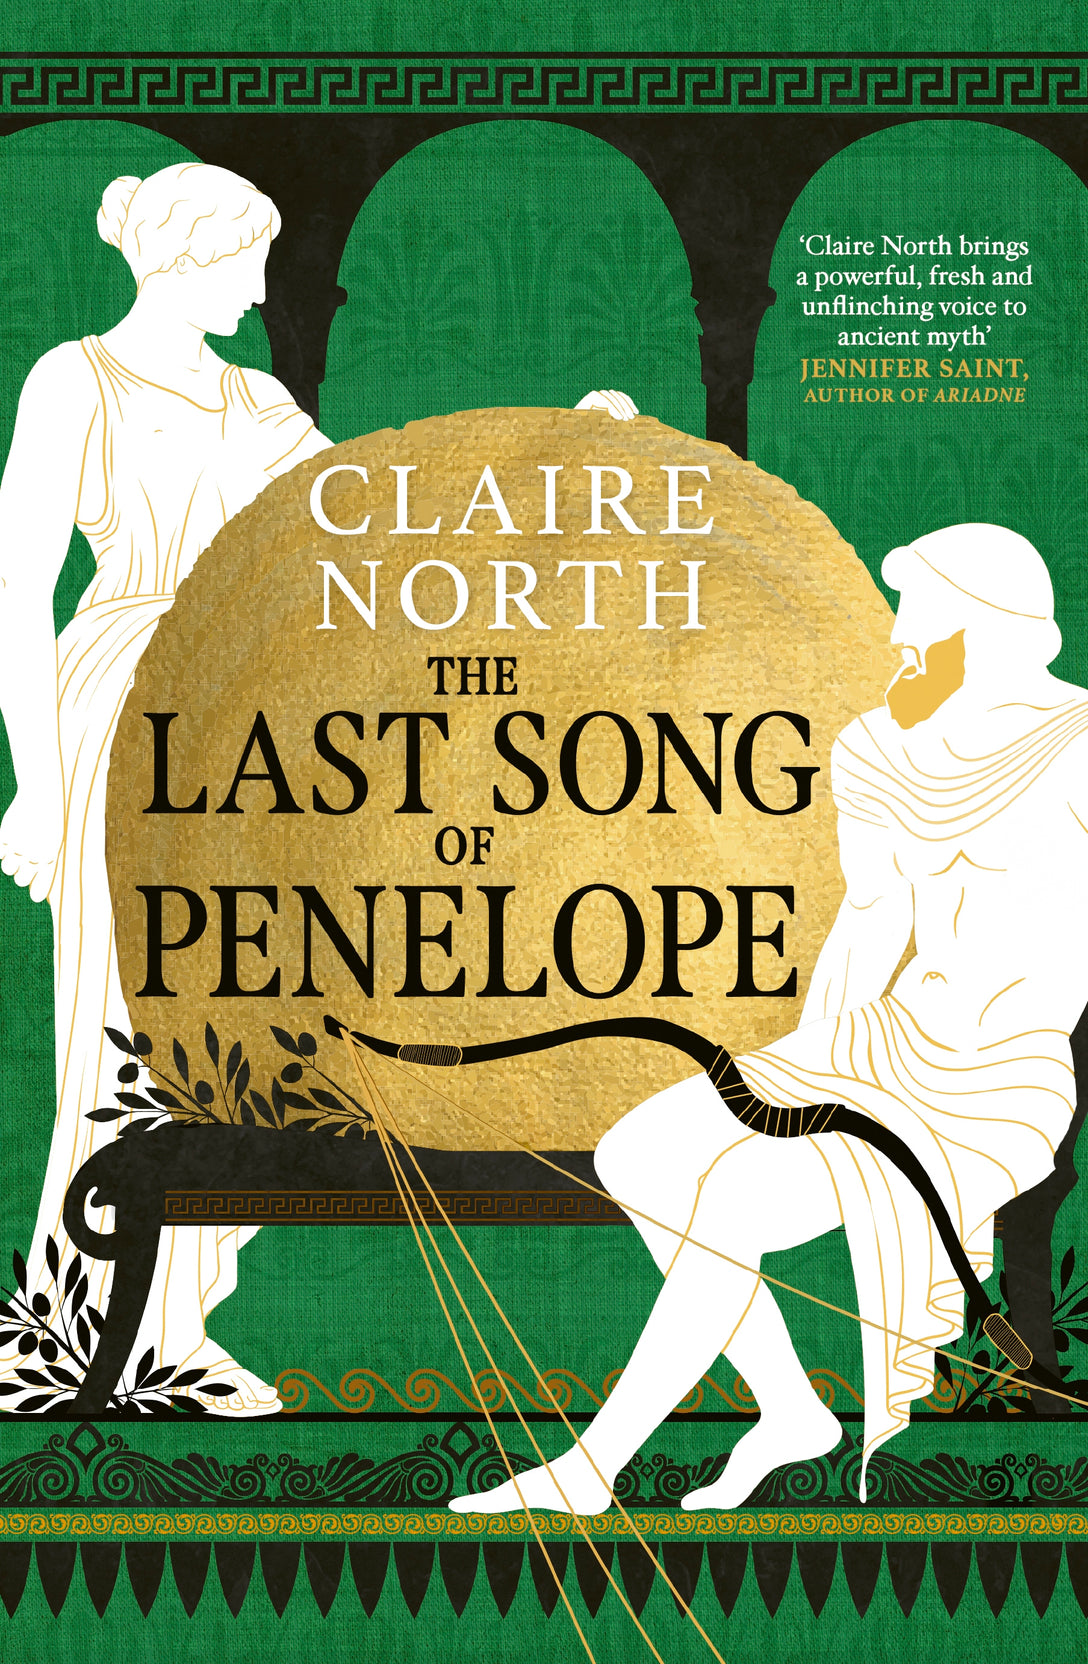 The Last Song of Penelope by Claire North